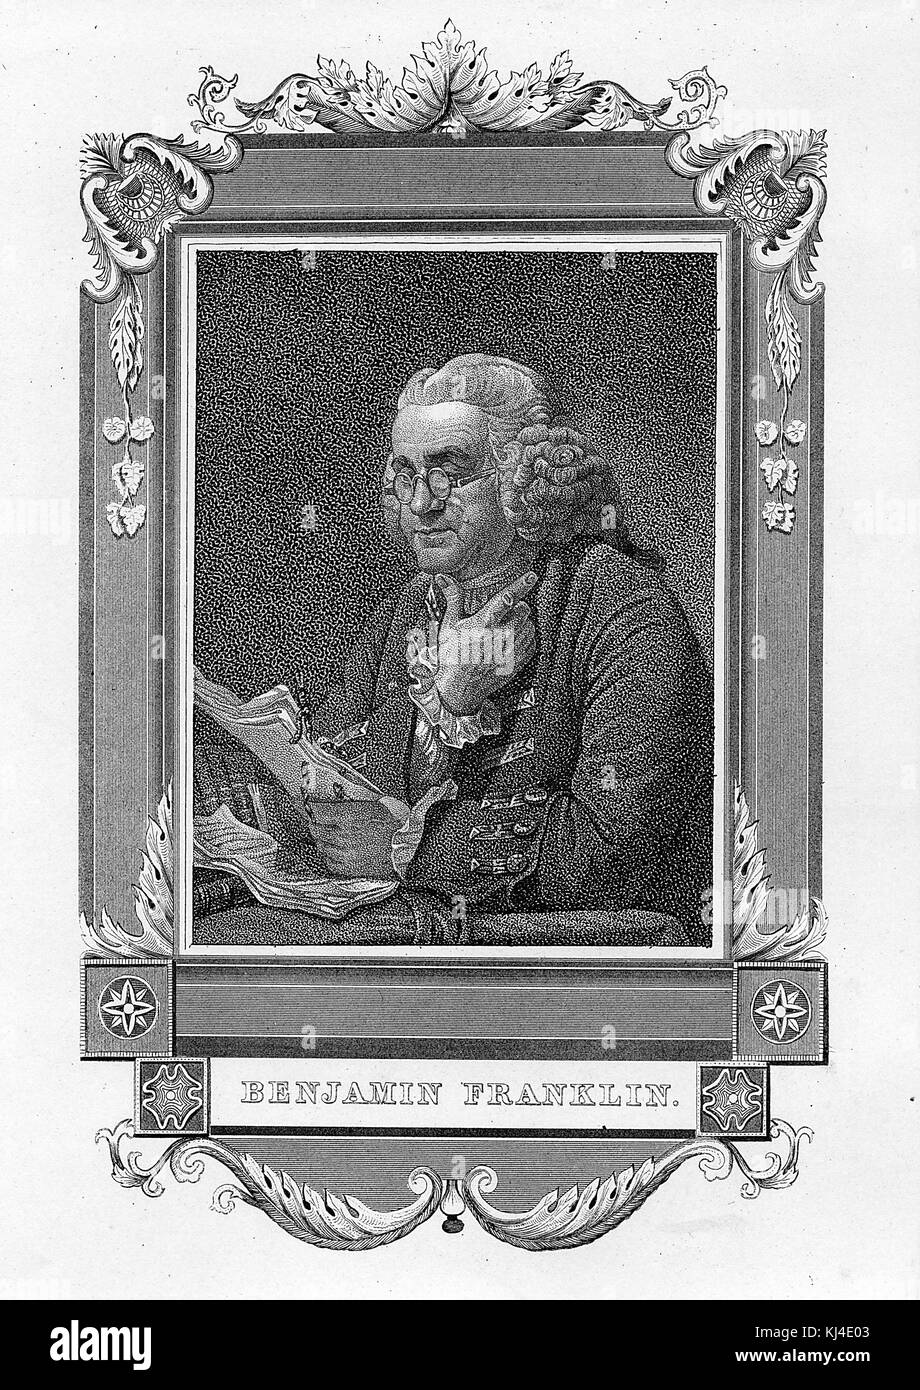 Engraved portrait of Benjamin Franklin, sitting at a desk, reading papers, surrounded by an ornate frame with a name plate at the bottom, 1831. From the New York Public Library. Stock Photo